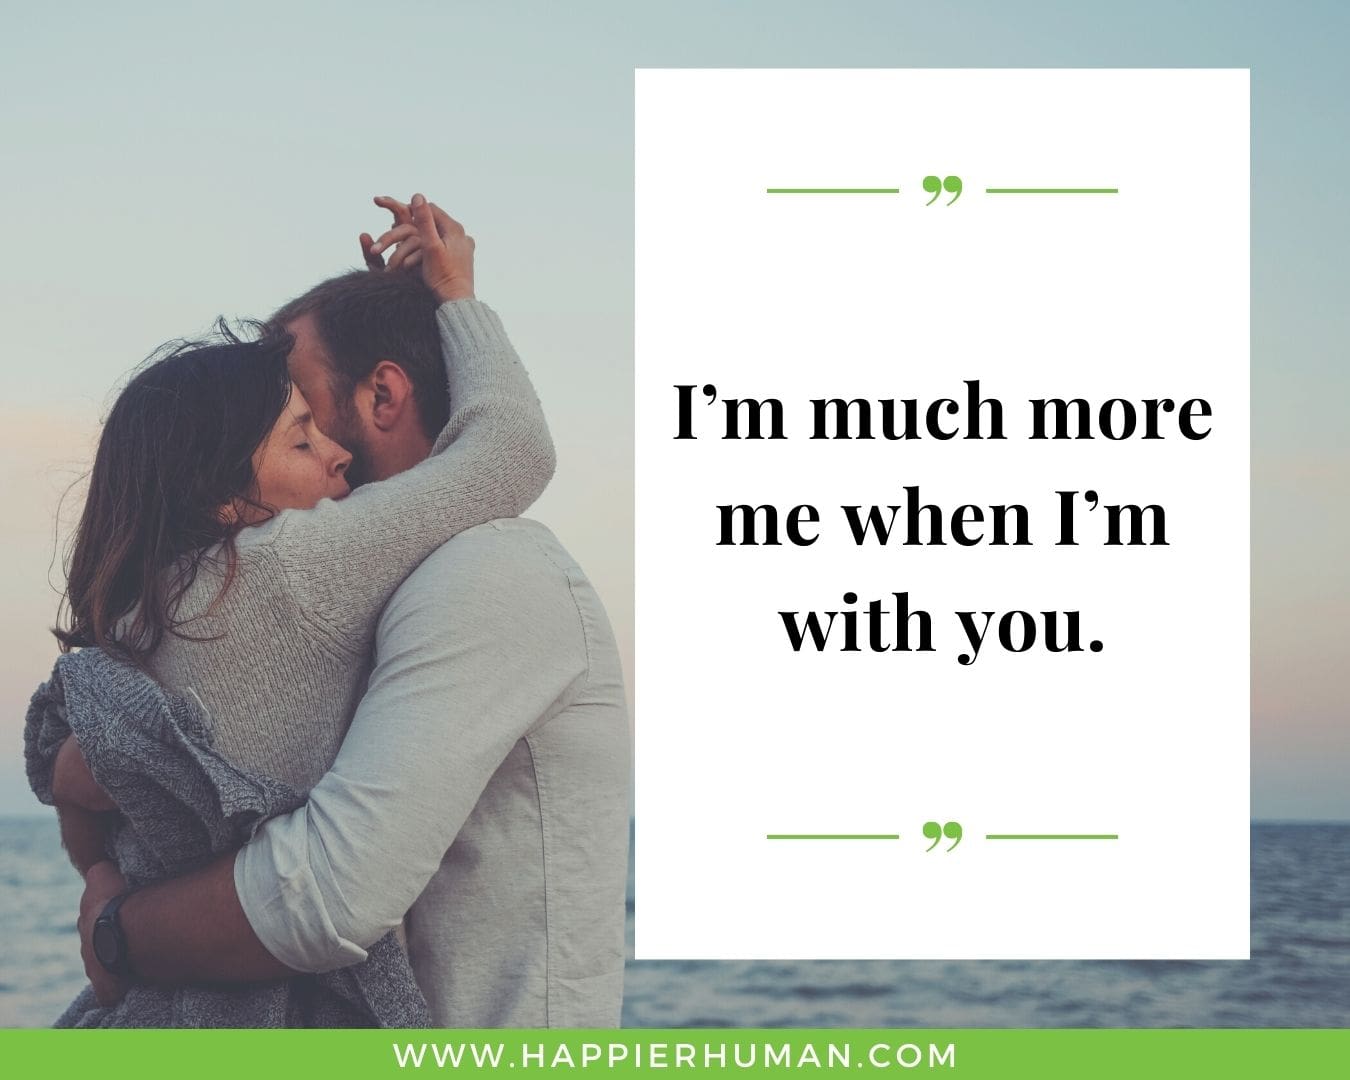 Short, Deep Love Quotes for Her - “I’m much more me when I’m with you.”